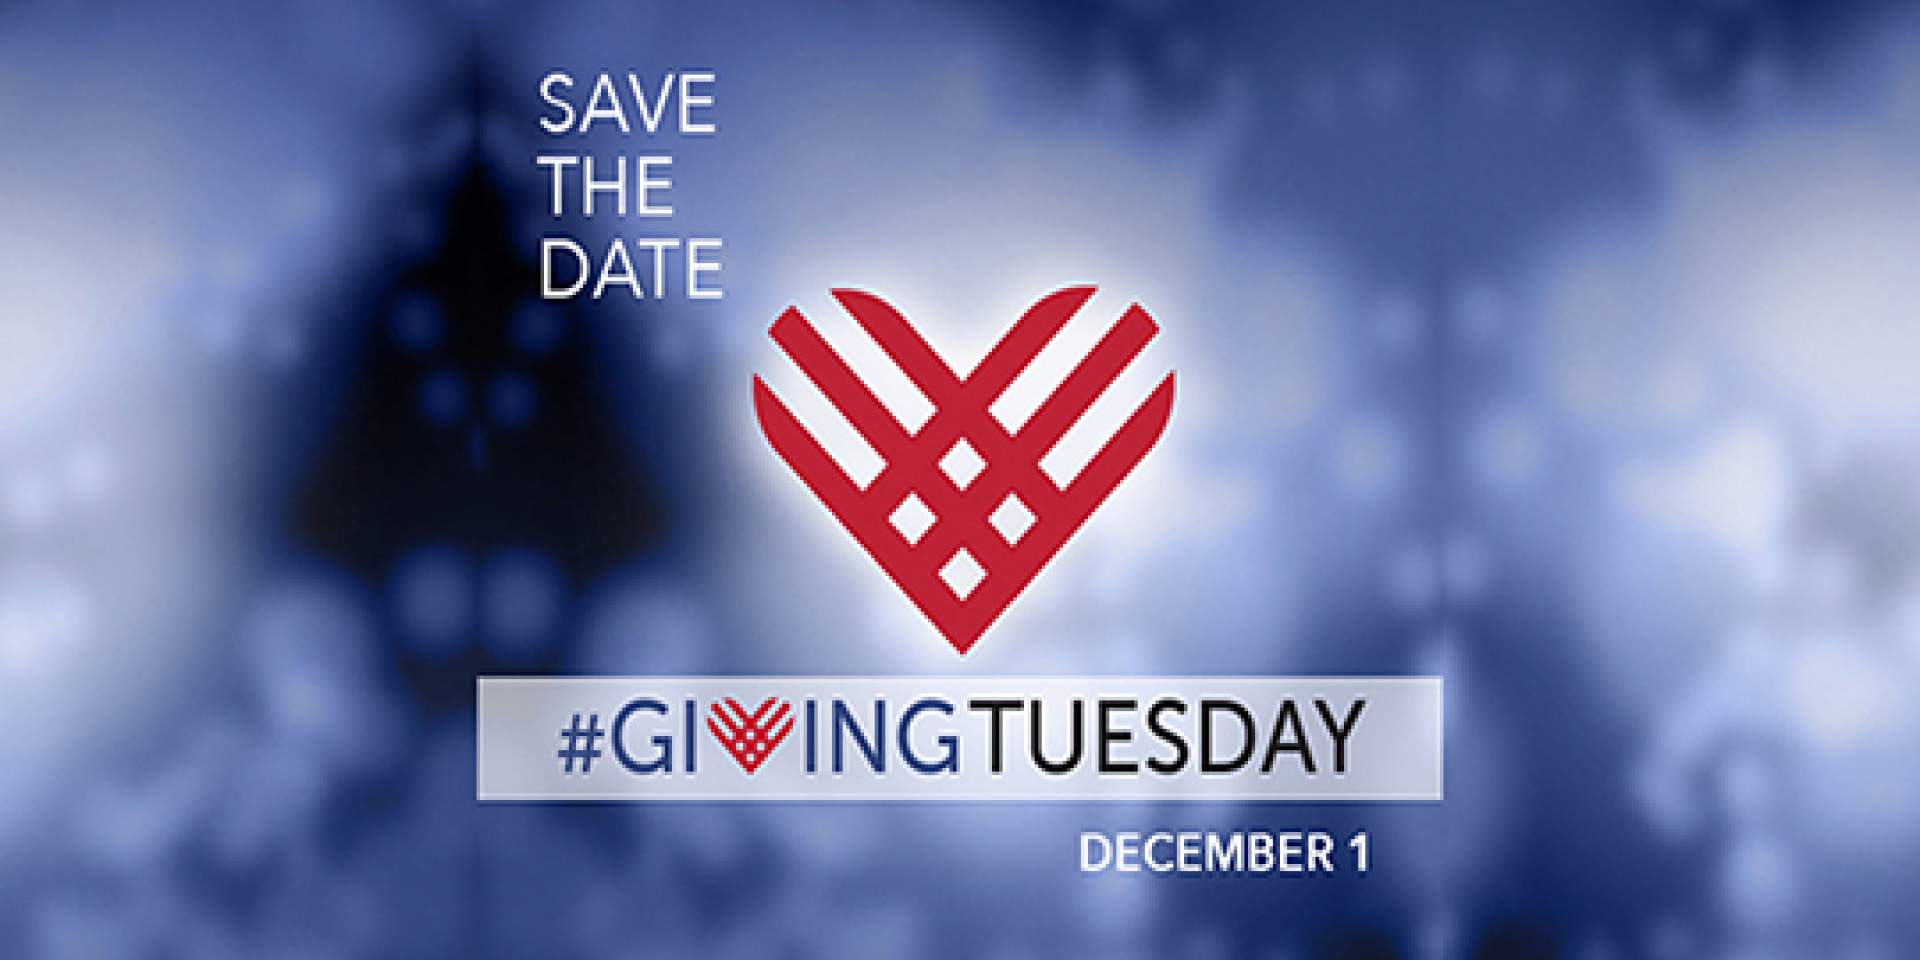 TODAY IS GIVING TUESDAY! Please consider a gift to the Burchfield Penney!